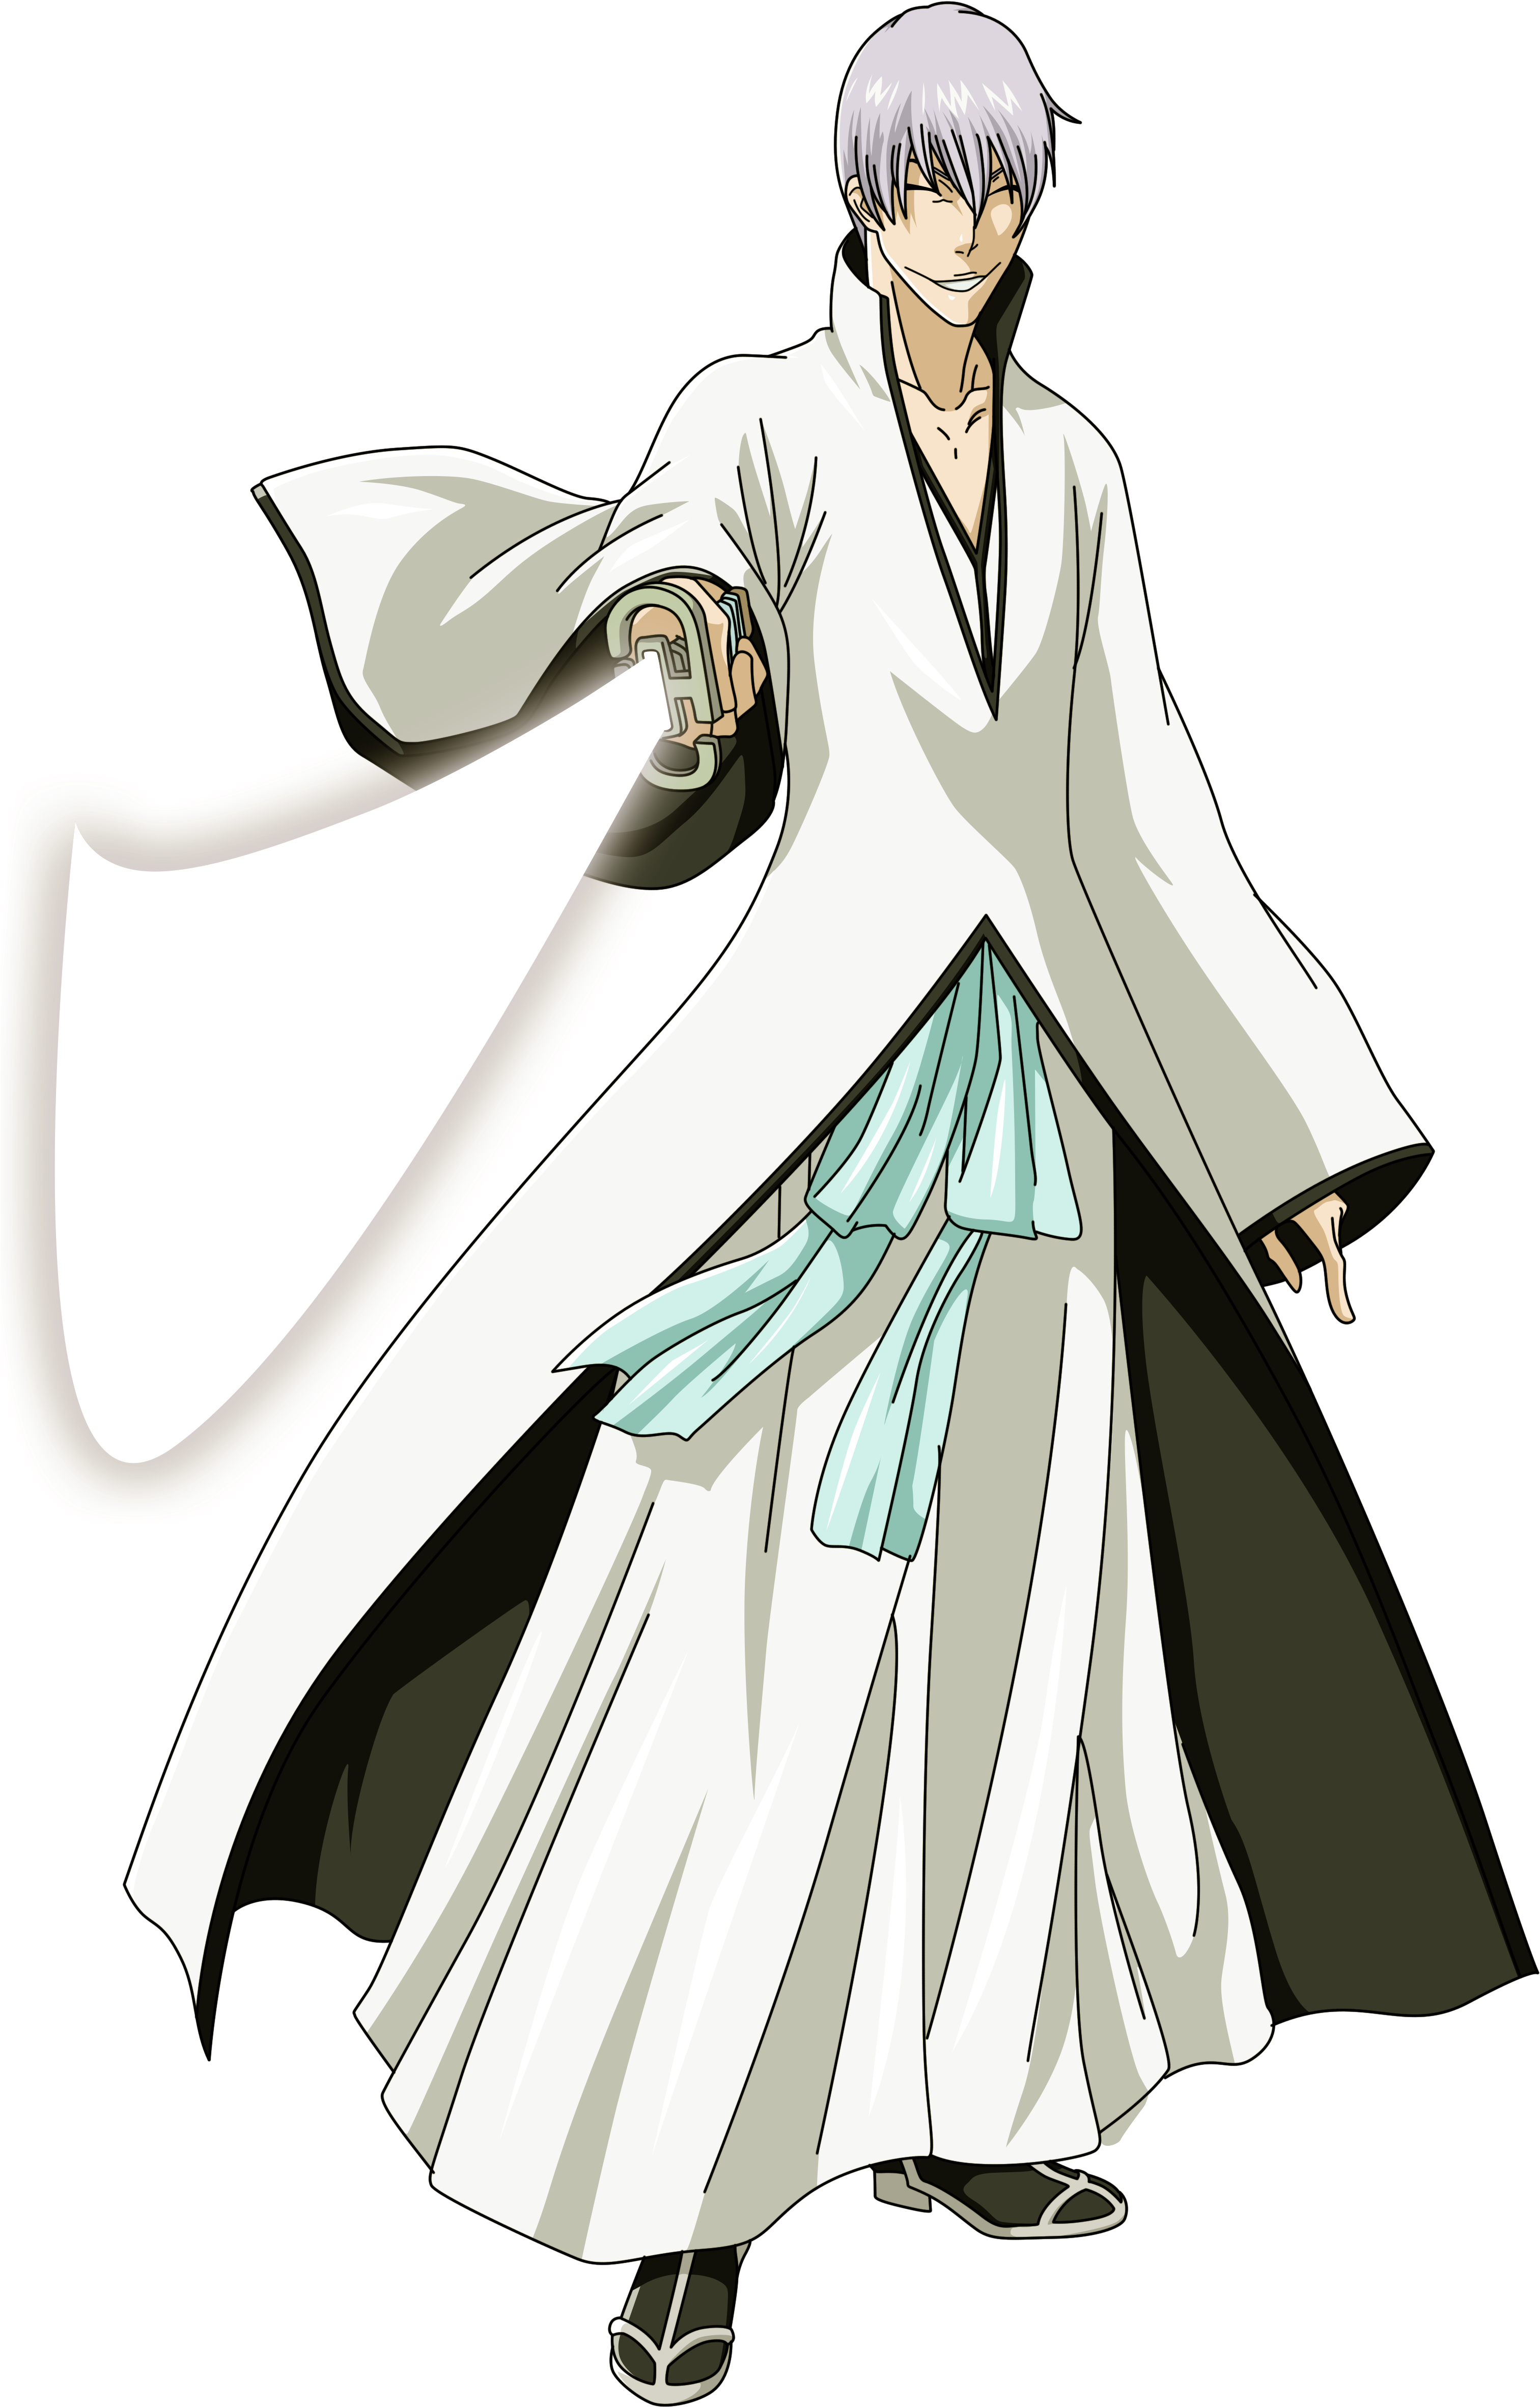 Animated_ Character_ With_ White_ Robe_and_ Silver_ Hair